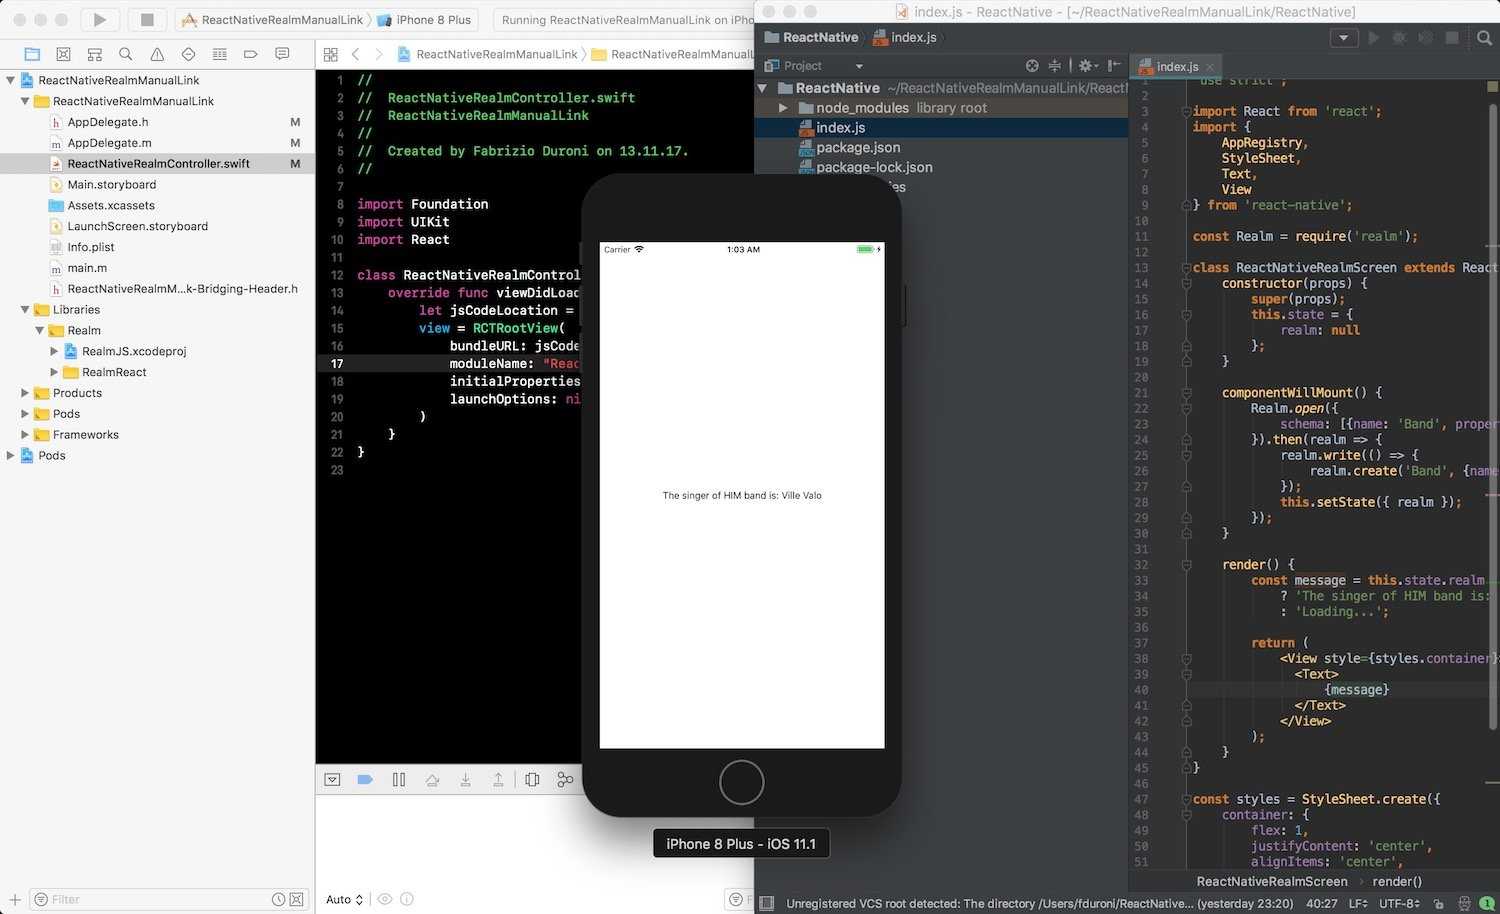 React Native and Realm: custom manual link for an iOS app with custom directory structure